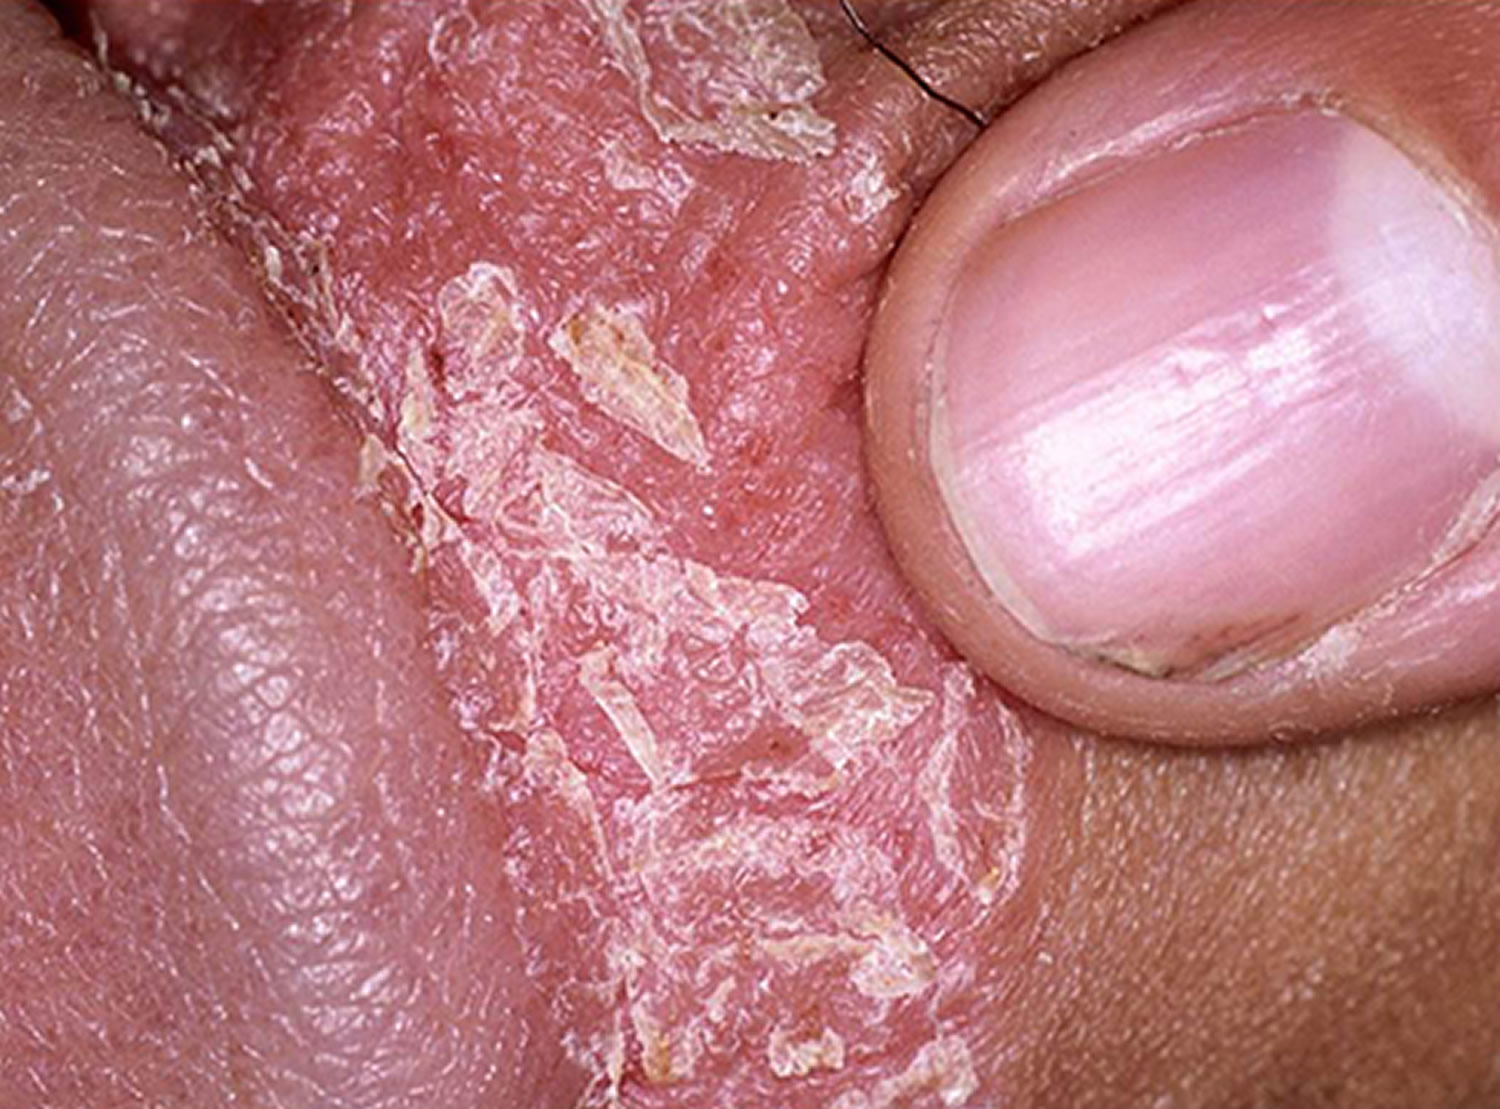 Psoriasis is usually clinically apparent in the presence of nail pitting or...